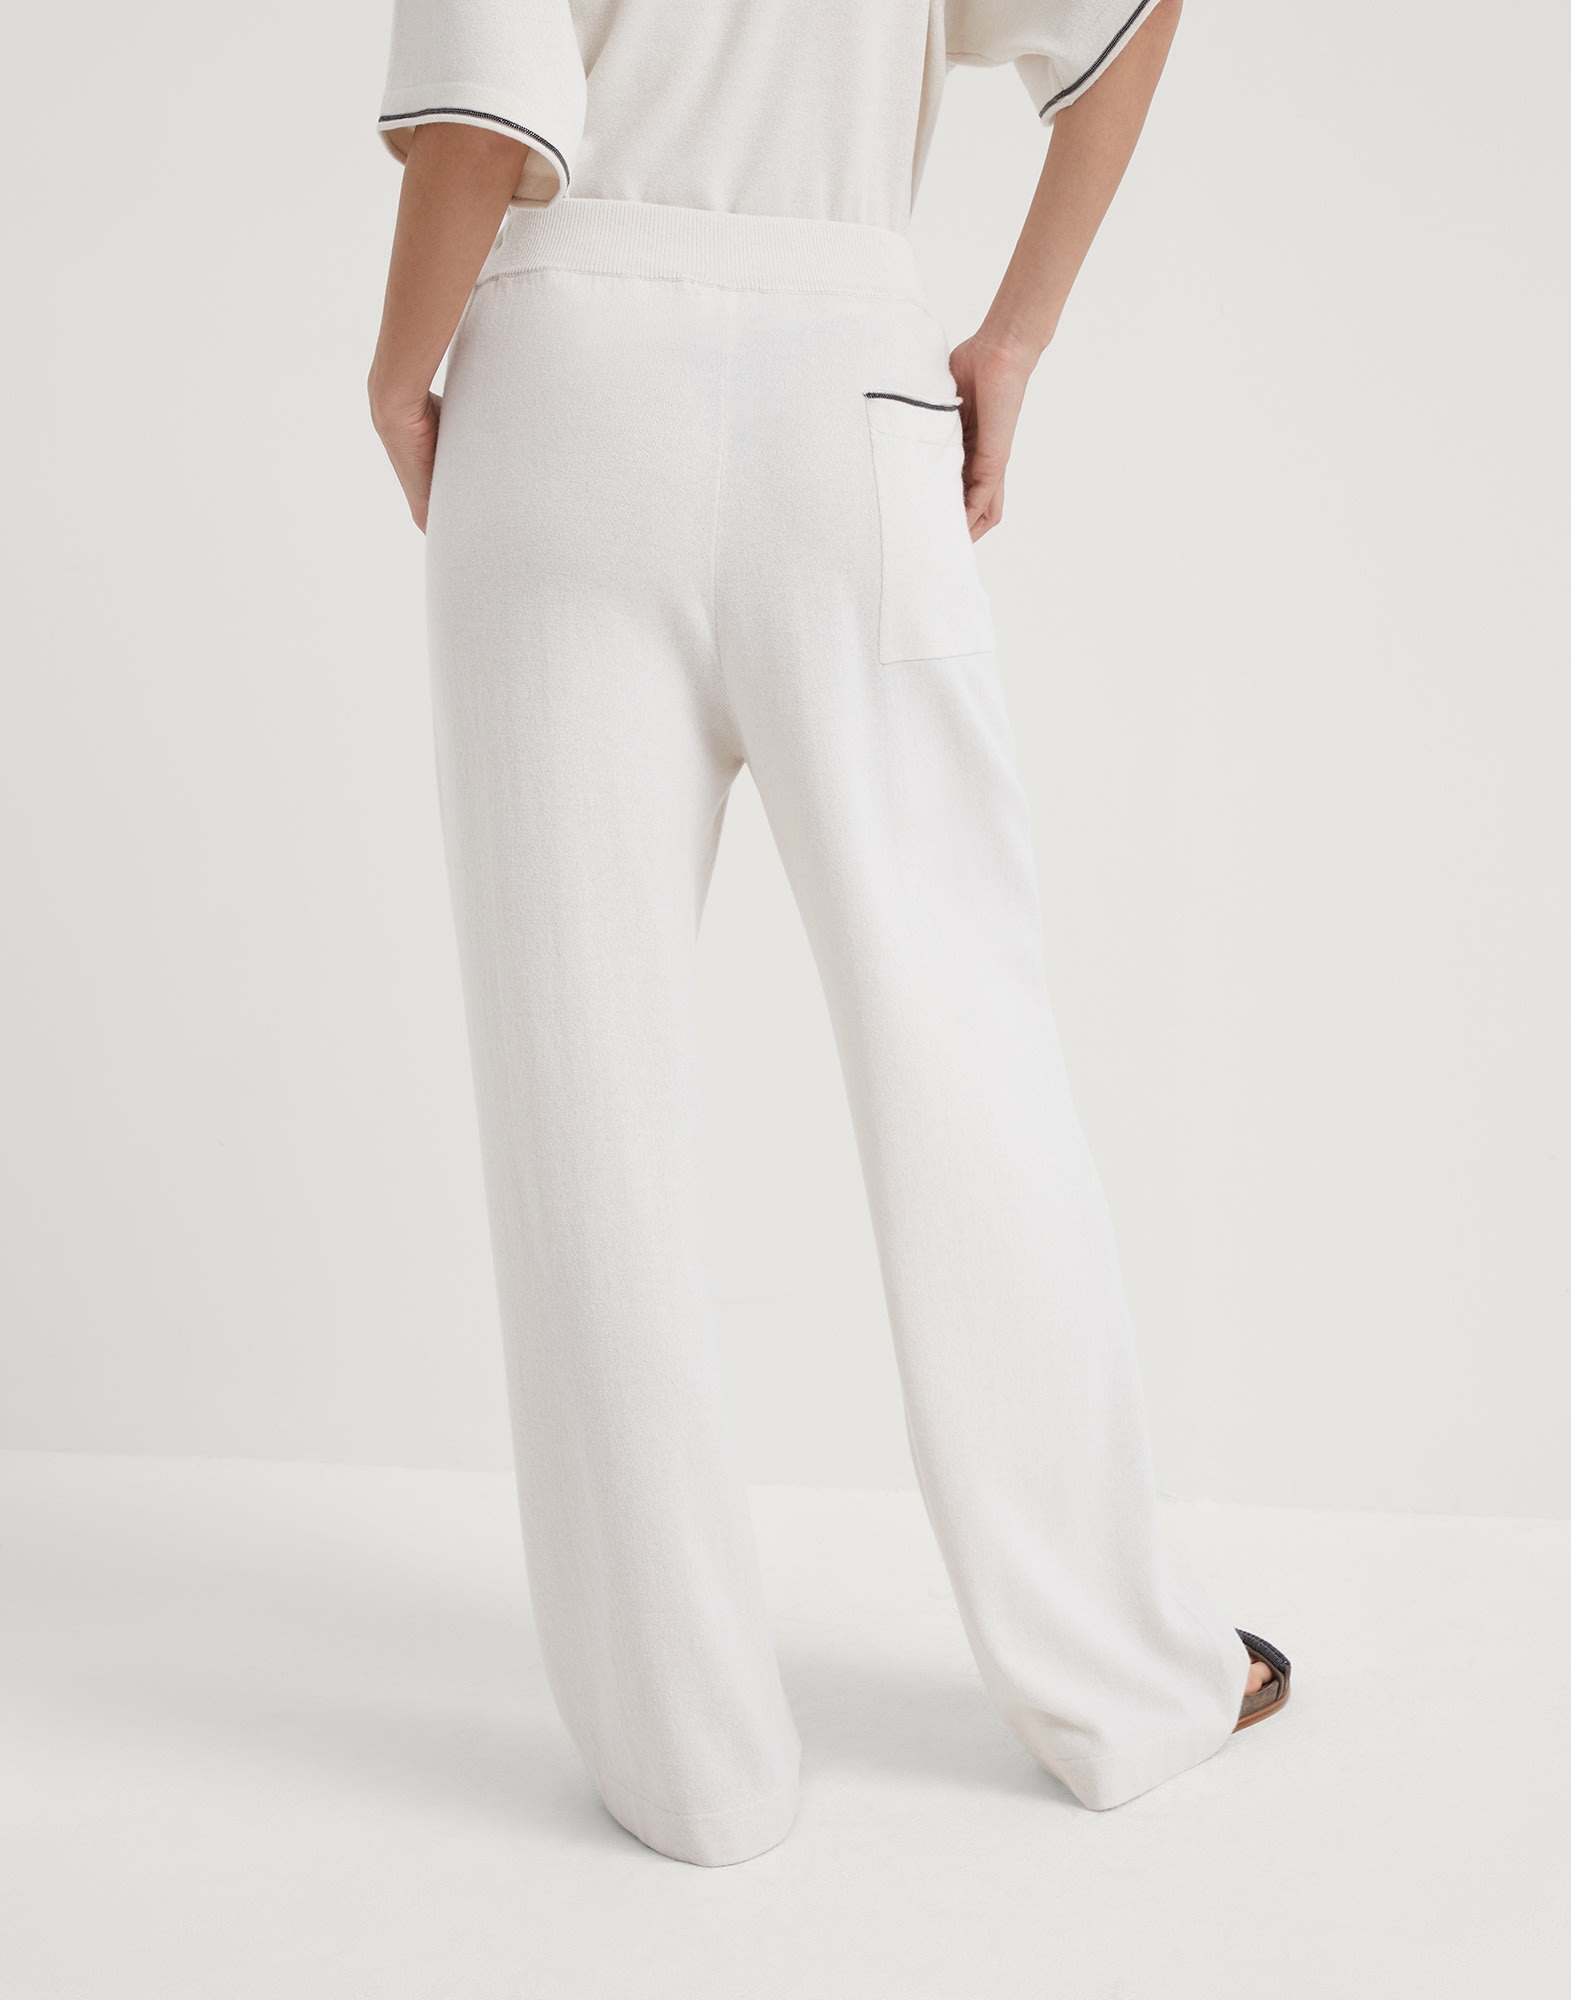 Virgin wool, cashmere and silk knit trousers with shiny pocket detail - 2